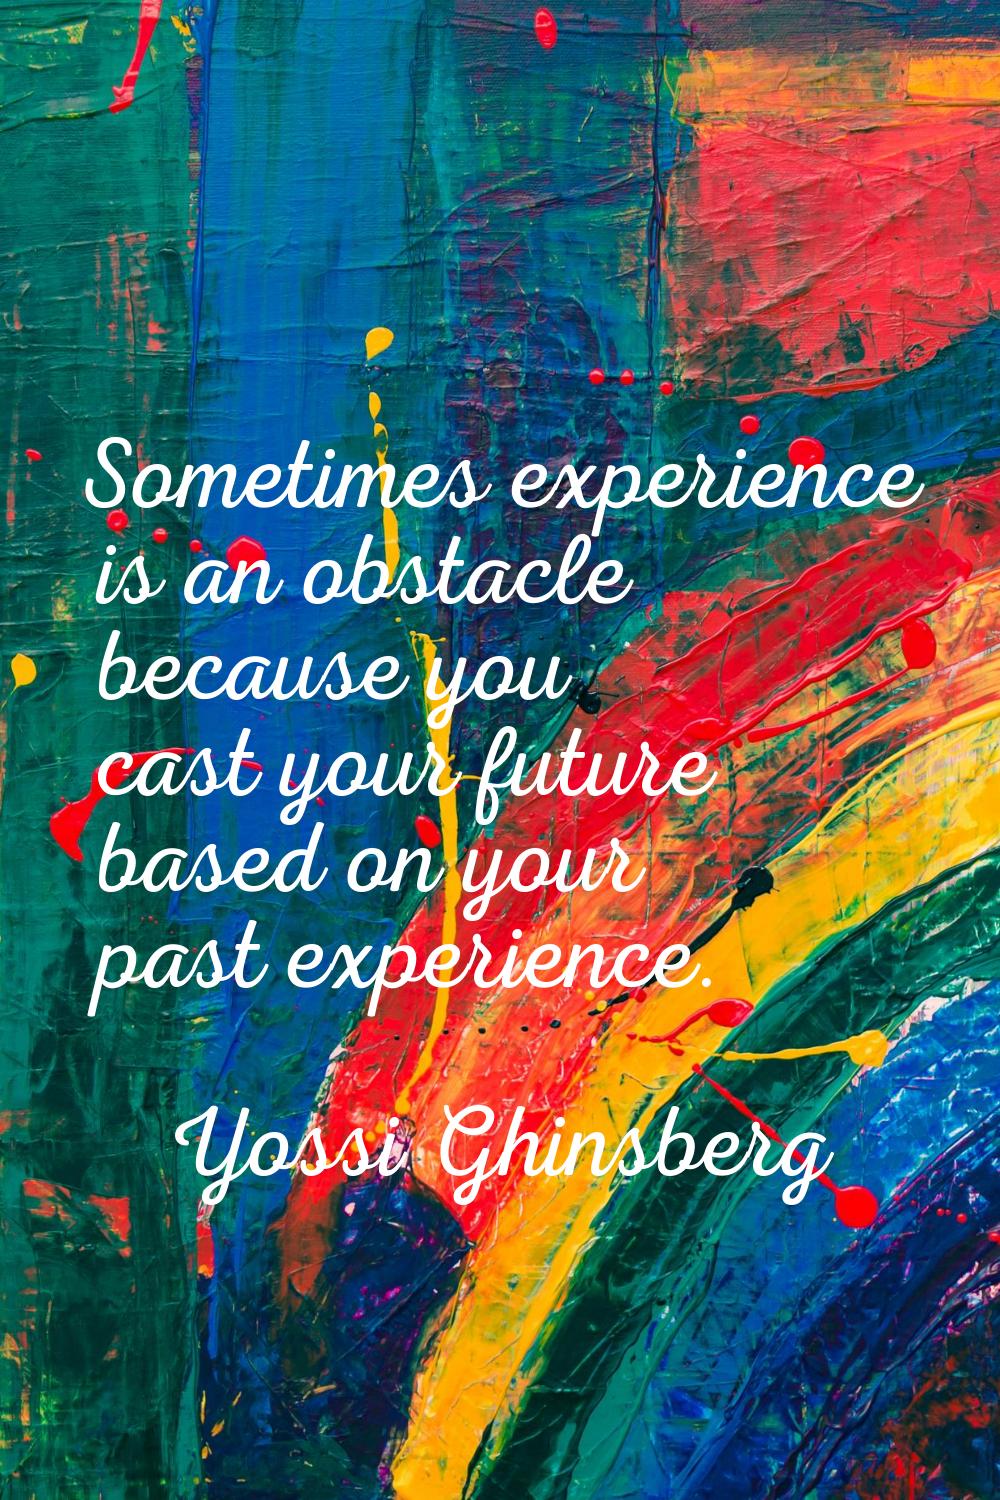 Sometimes experience is an obstacle because you cast your future based on your past experience.